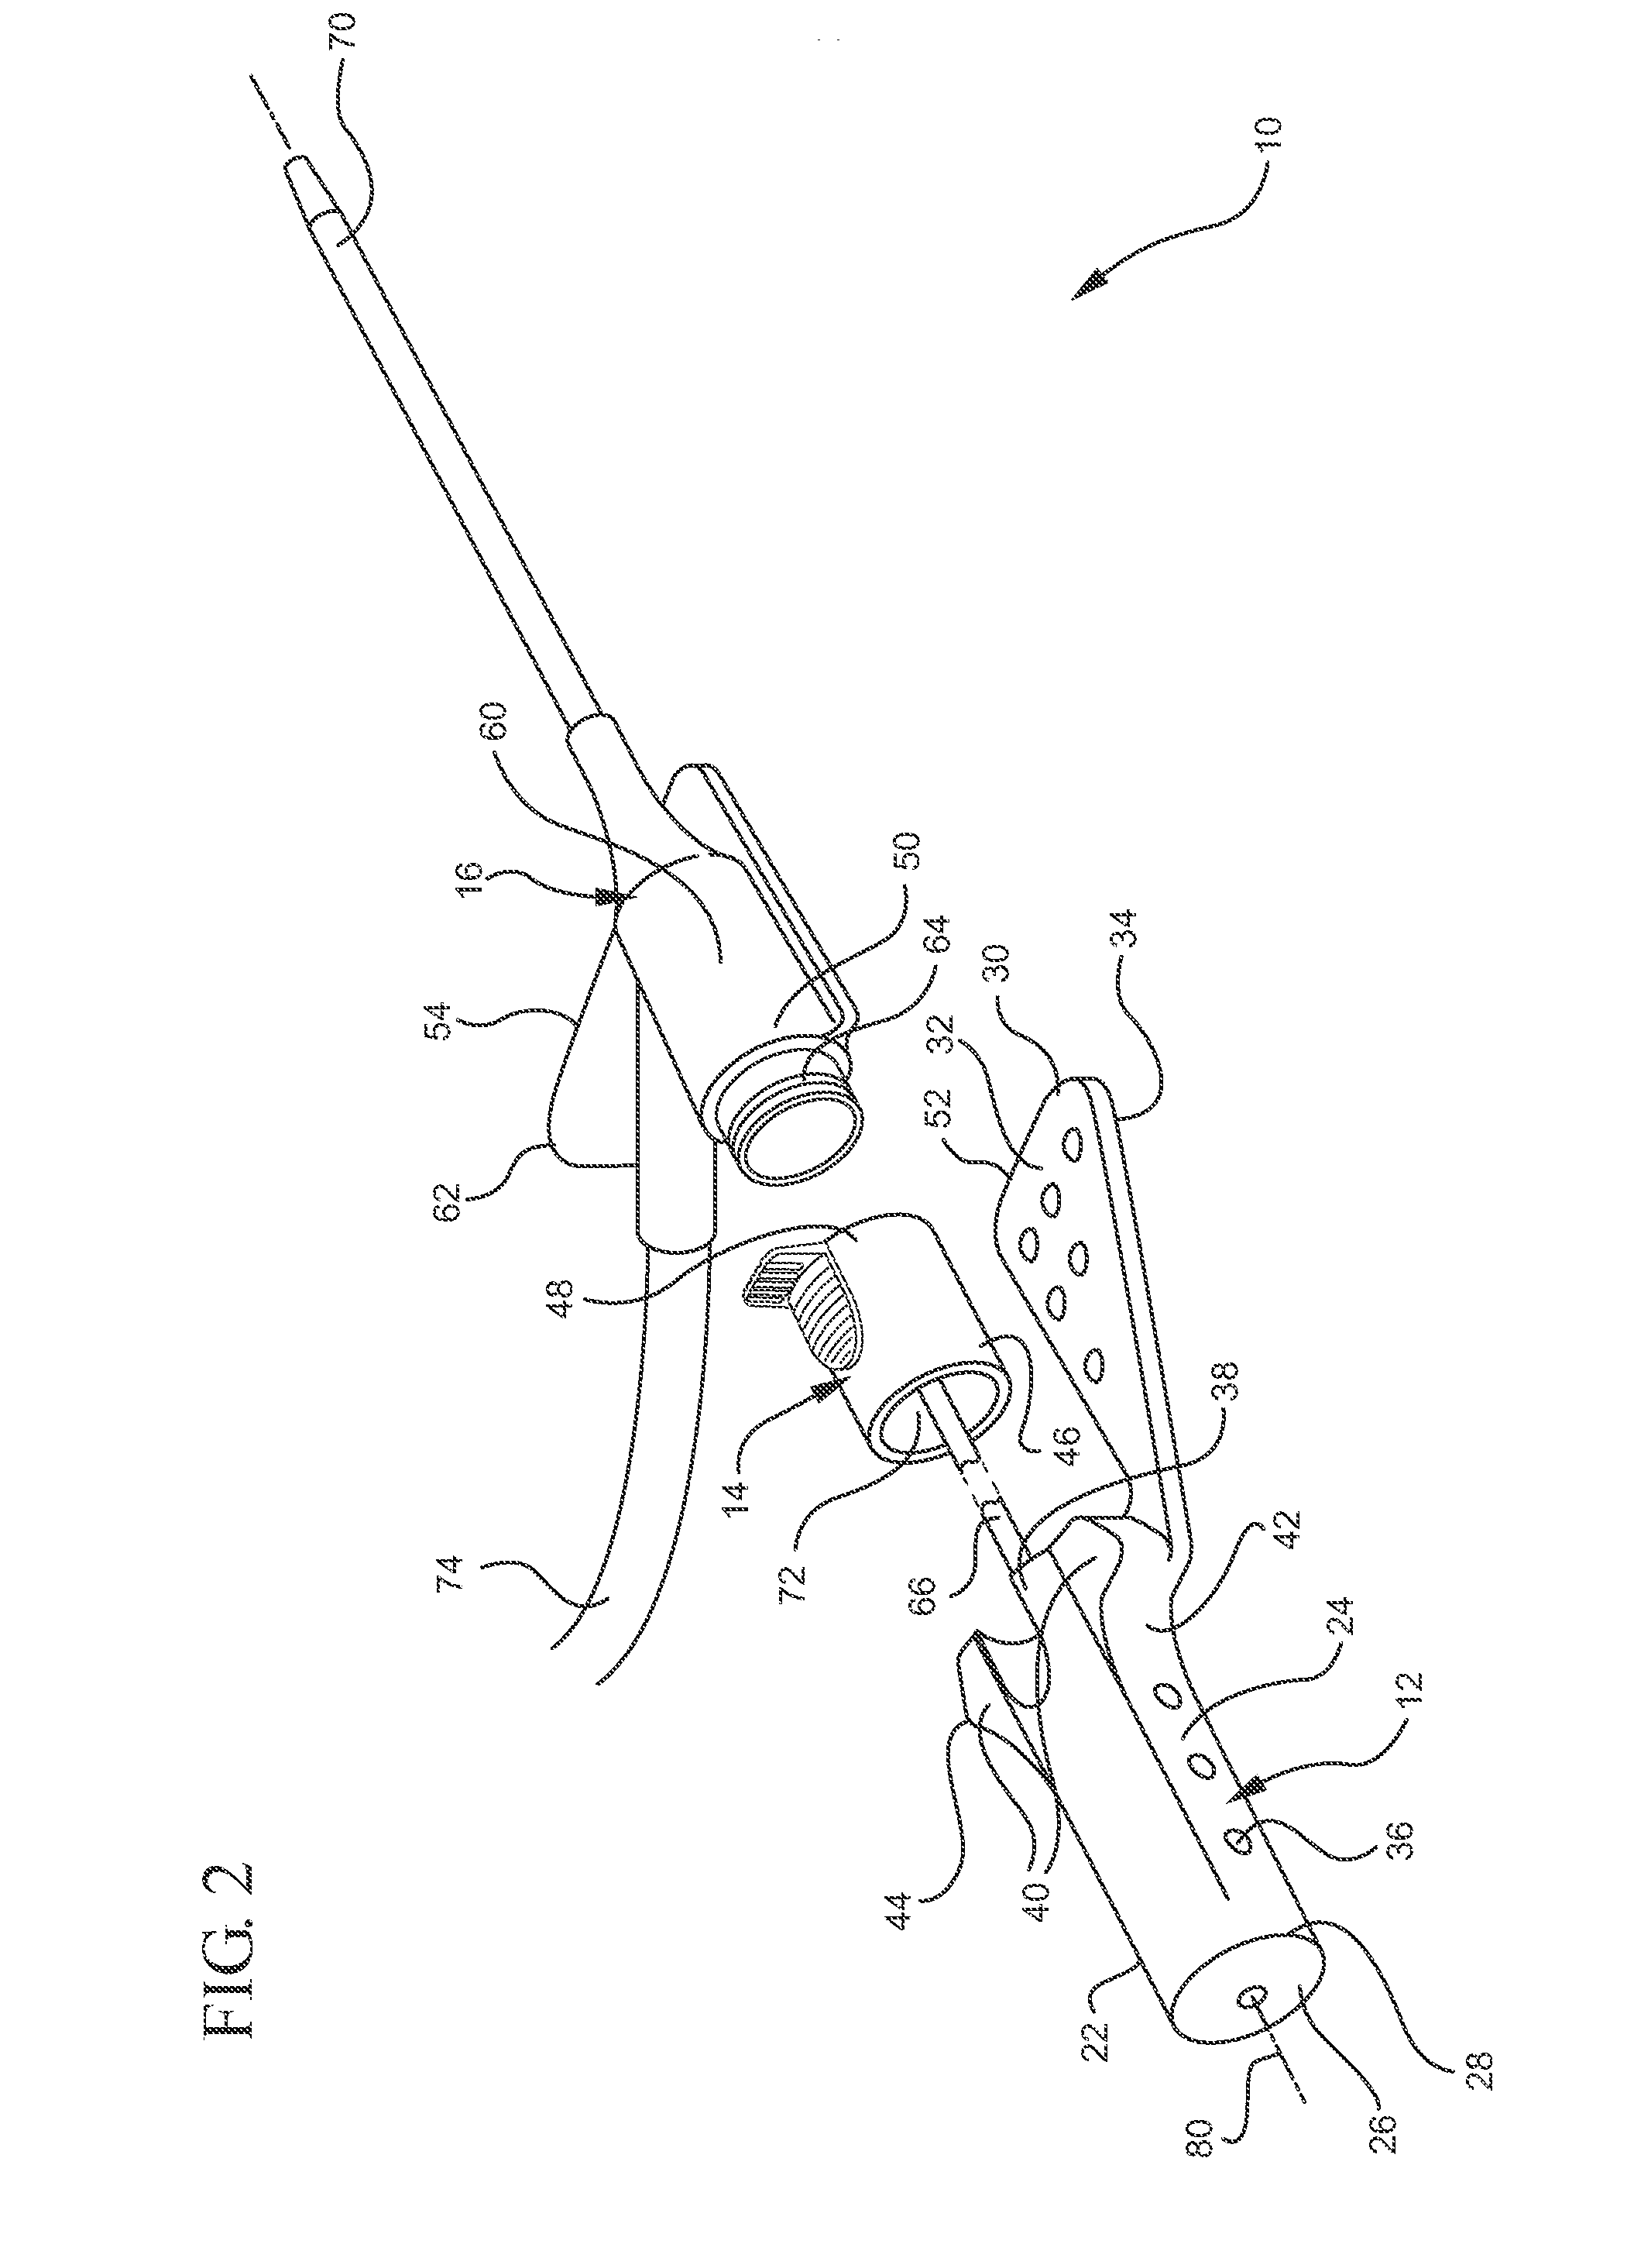 Systems and methods for providing a safety integrated catheter with universal grip